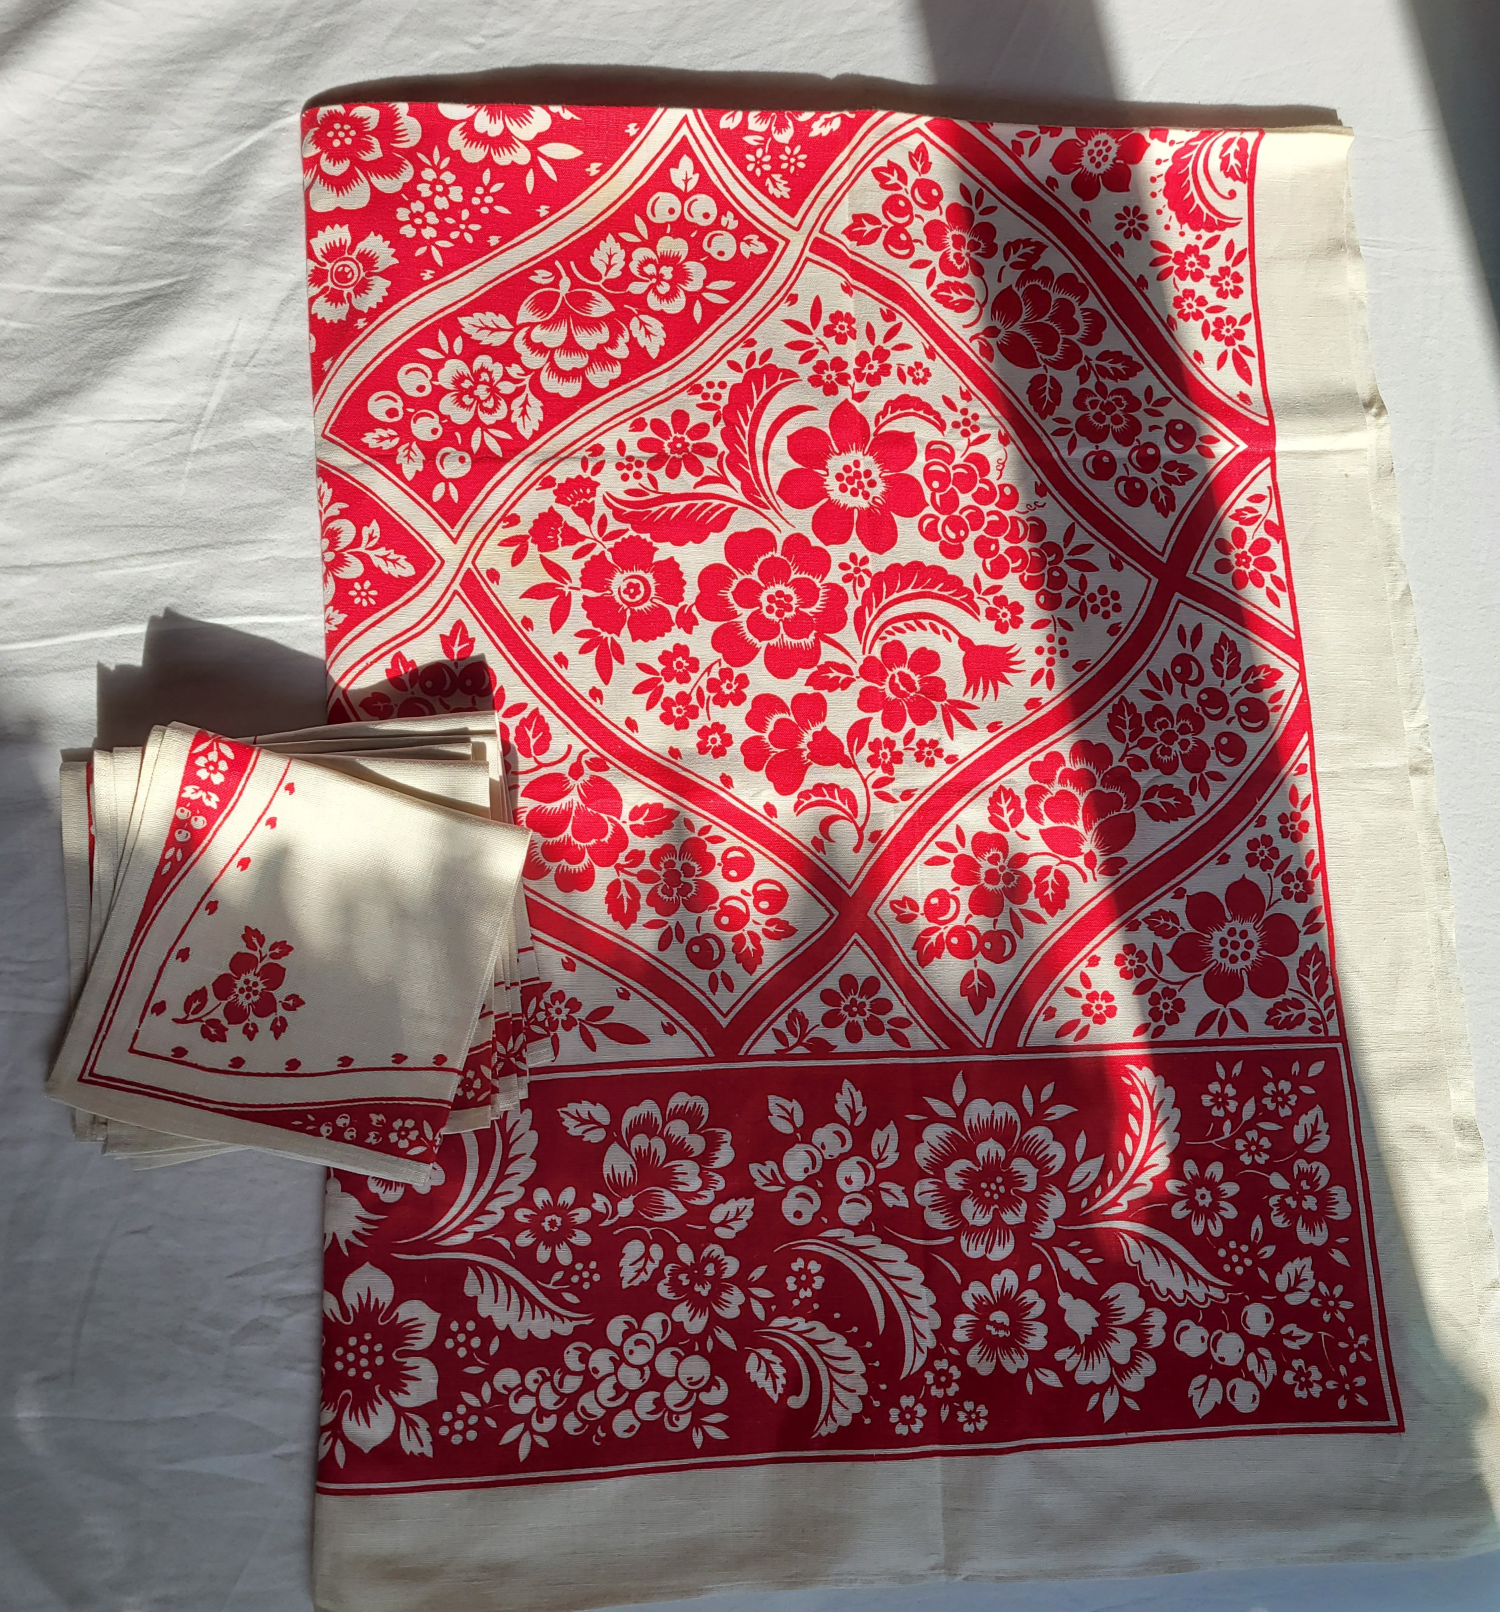 Vintage Red Floral Print Linen Table Cloth and Napkins